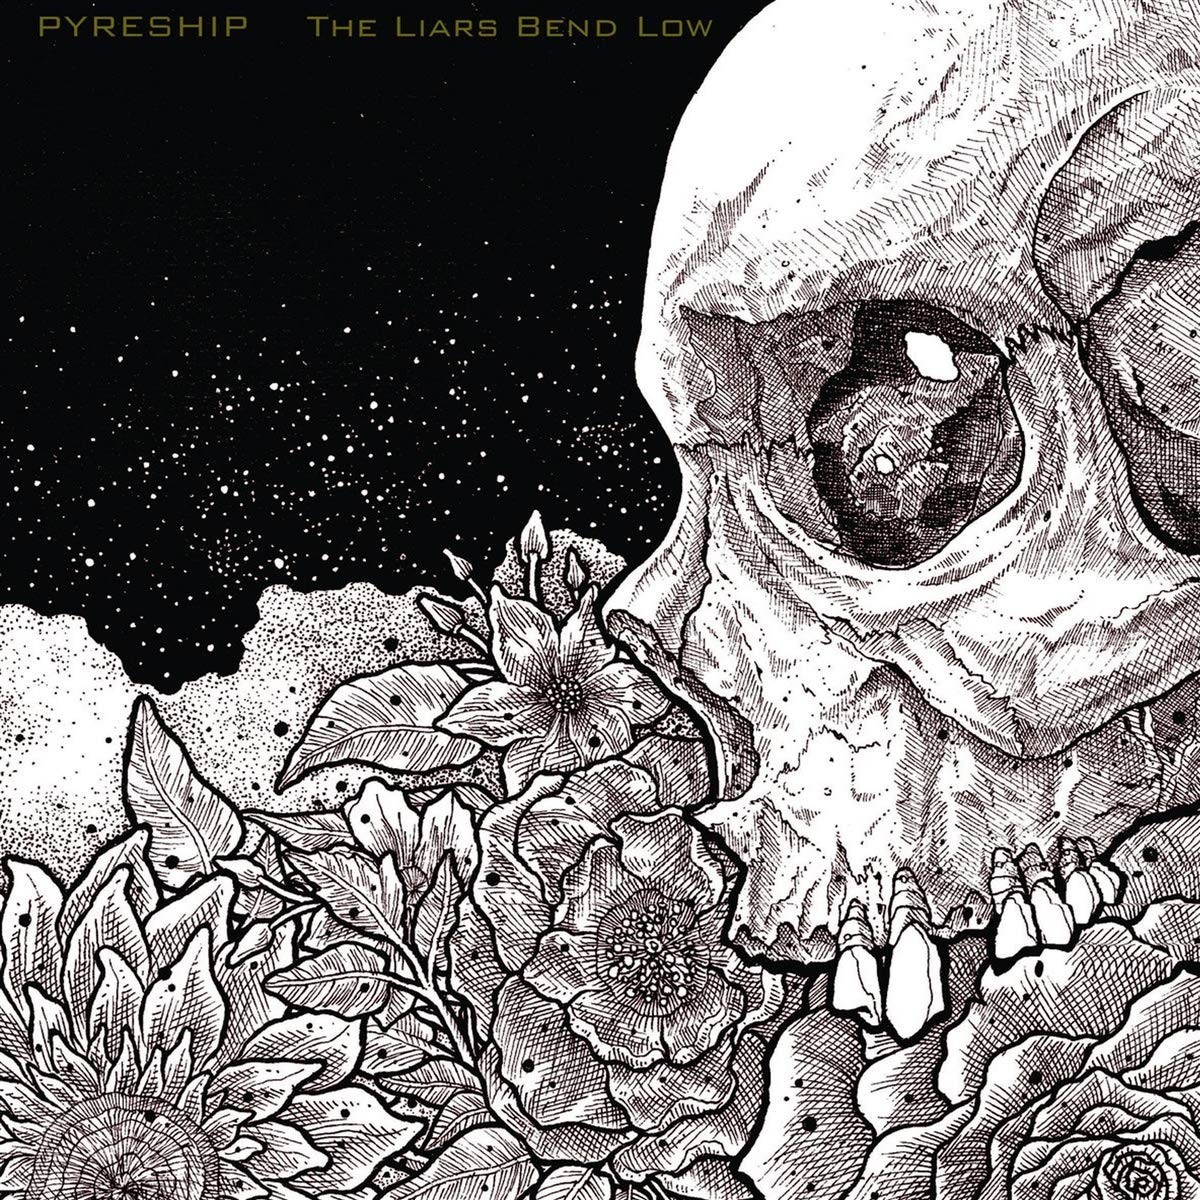 Pyreship - The Liars Bend Low